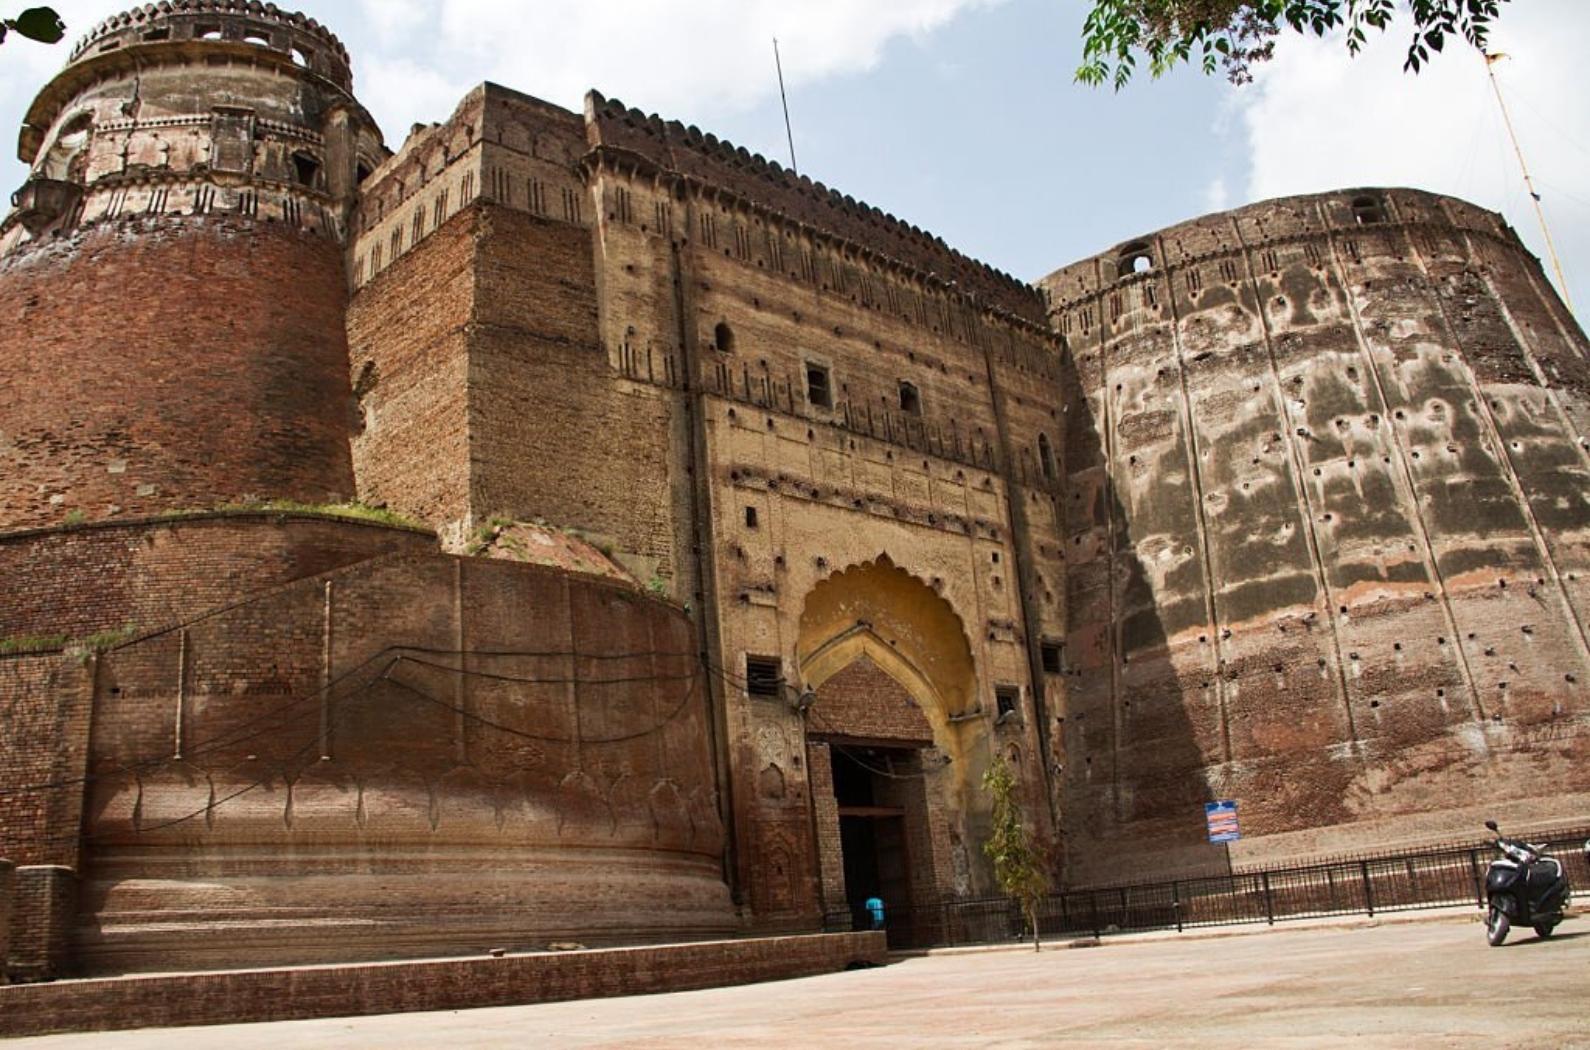 Qila Mubarak, is a historical monument in the heart of the city of Bathinda in Punjab, India. It has been in existence from 90-110 AD in its current place.